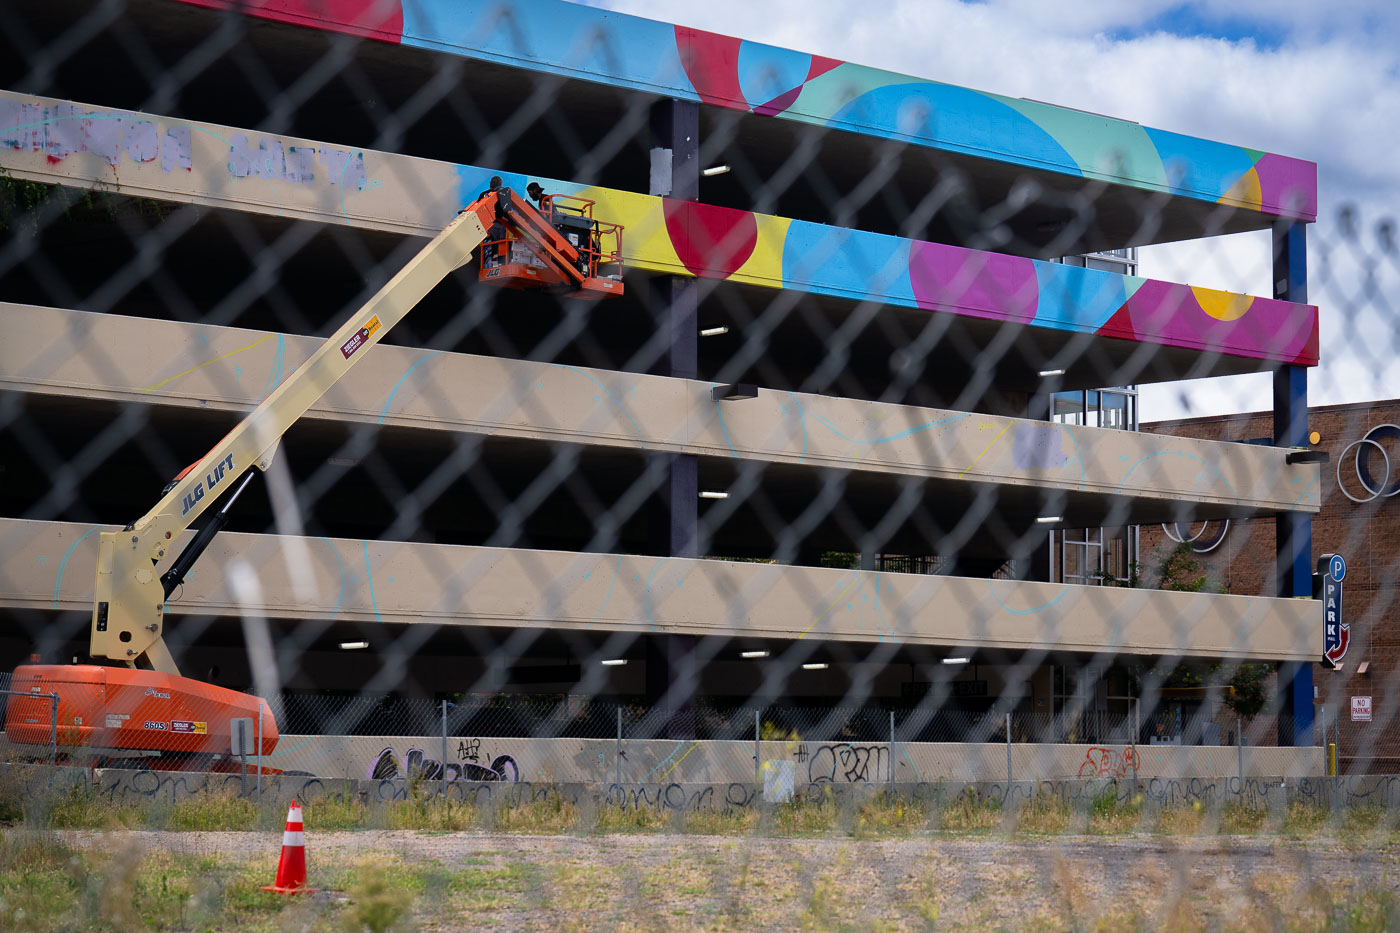 A new mural being painted on the parking garage next to Seven Points Mall at Lake and Girard in Uptown Minneapolis. Winston Smith was killed by law enforcement on June 3, 2021 on the top floor which led to months of protest.